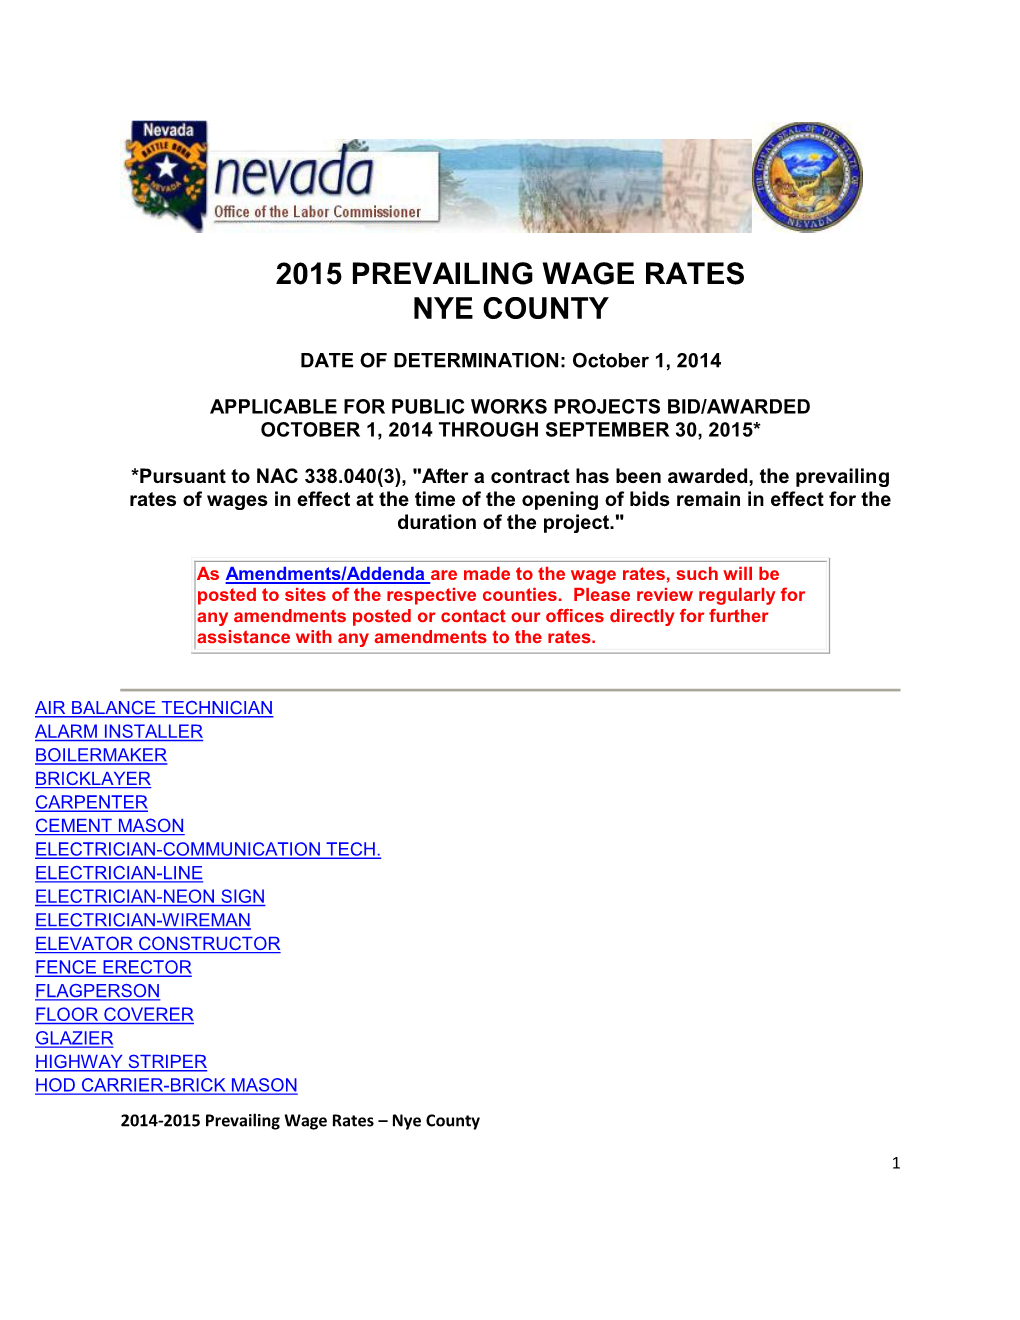 2015 Prevailing Wage Rates Nye County